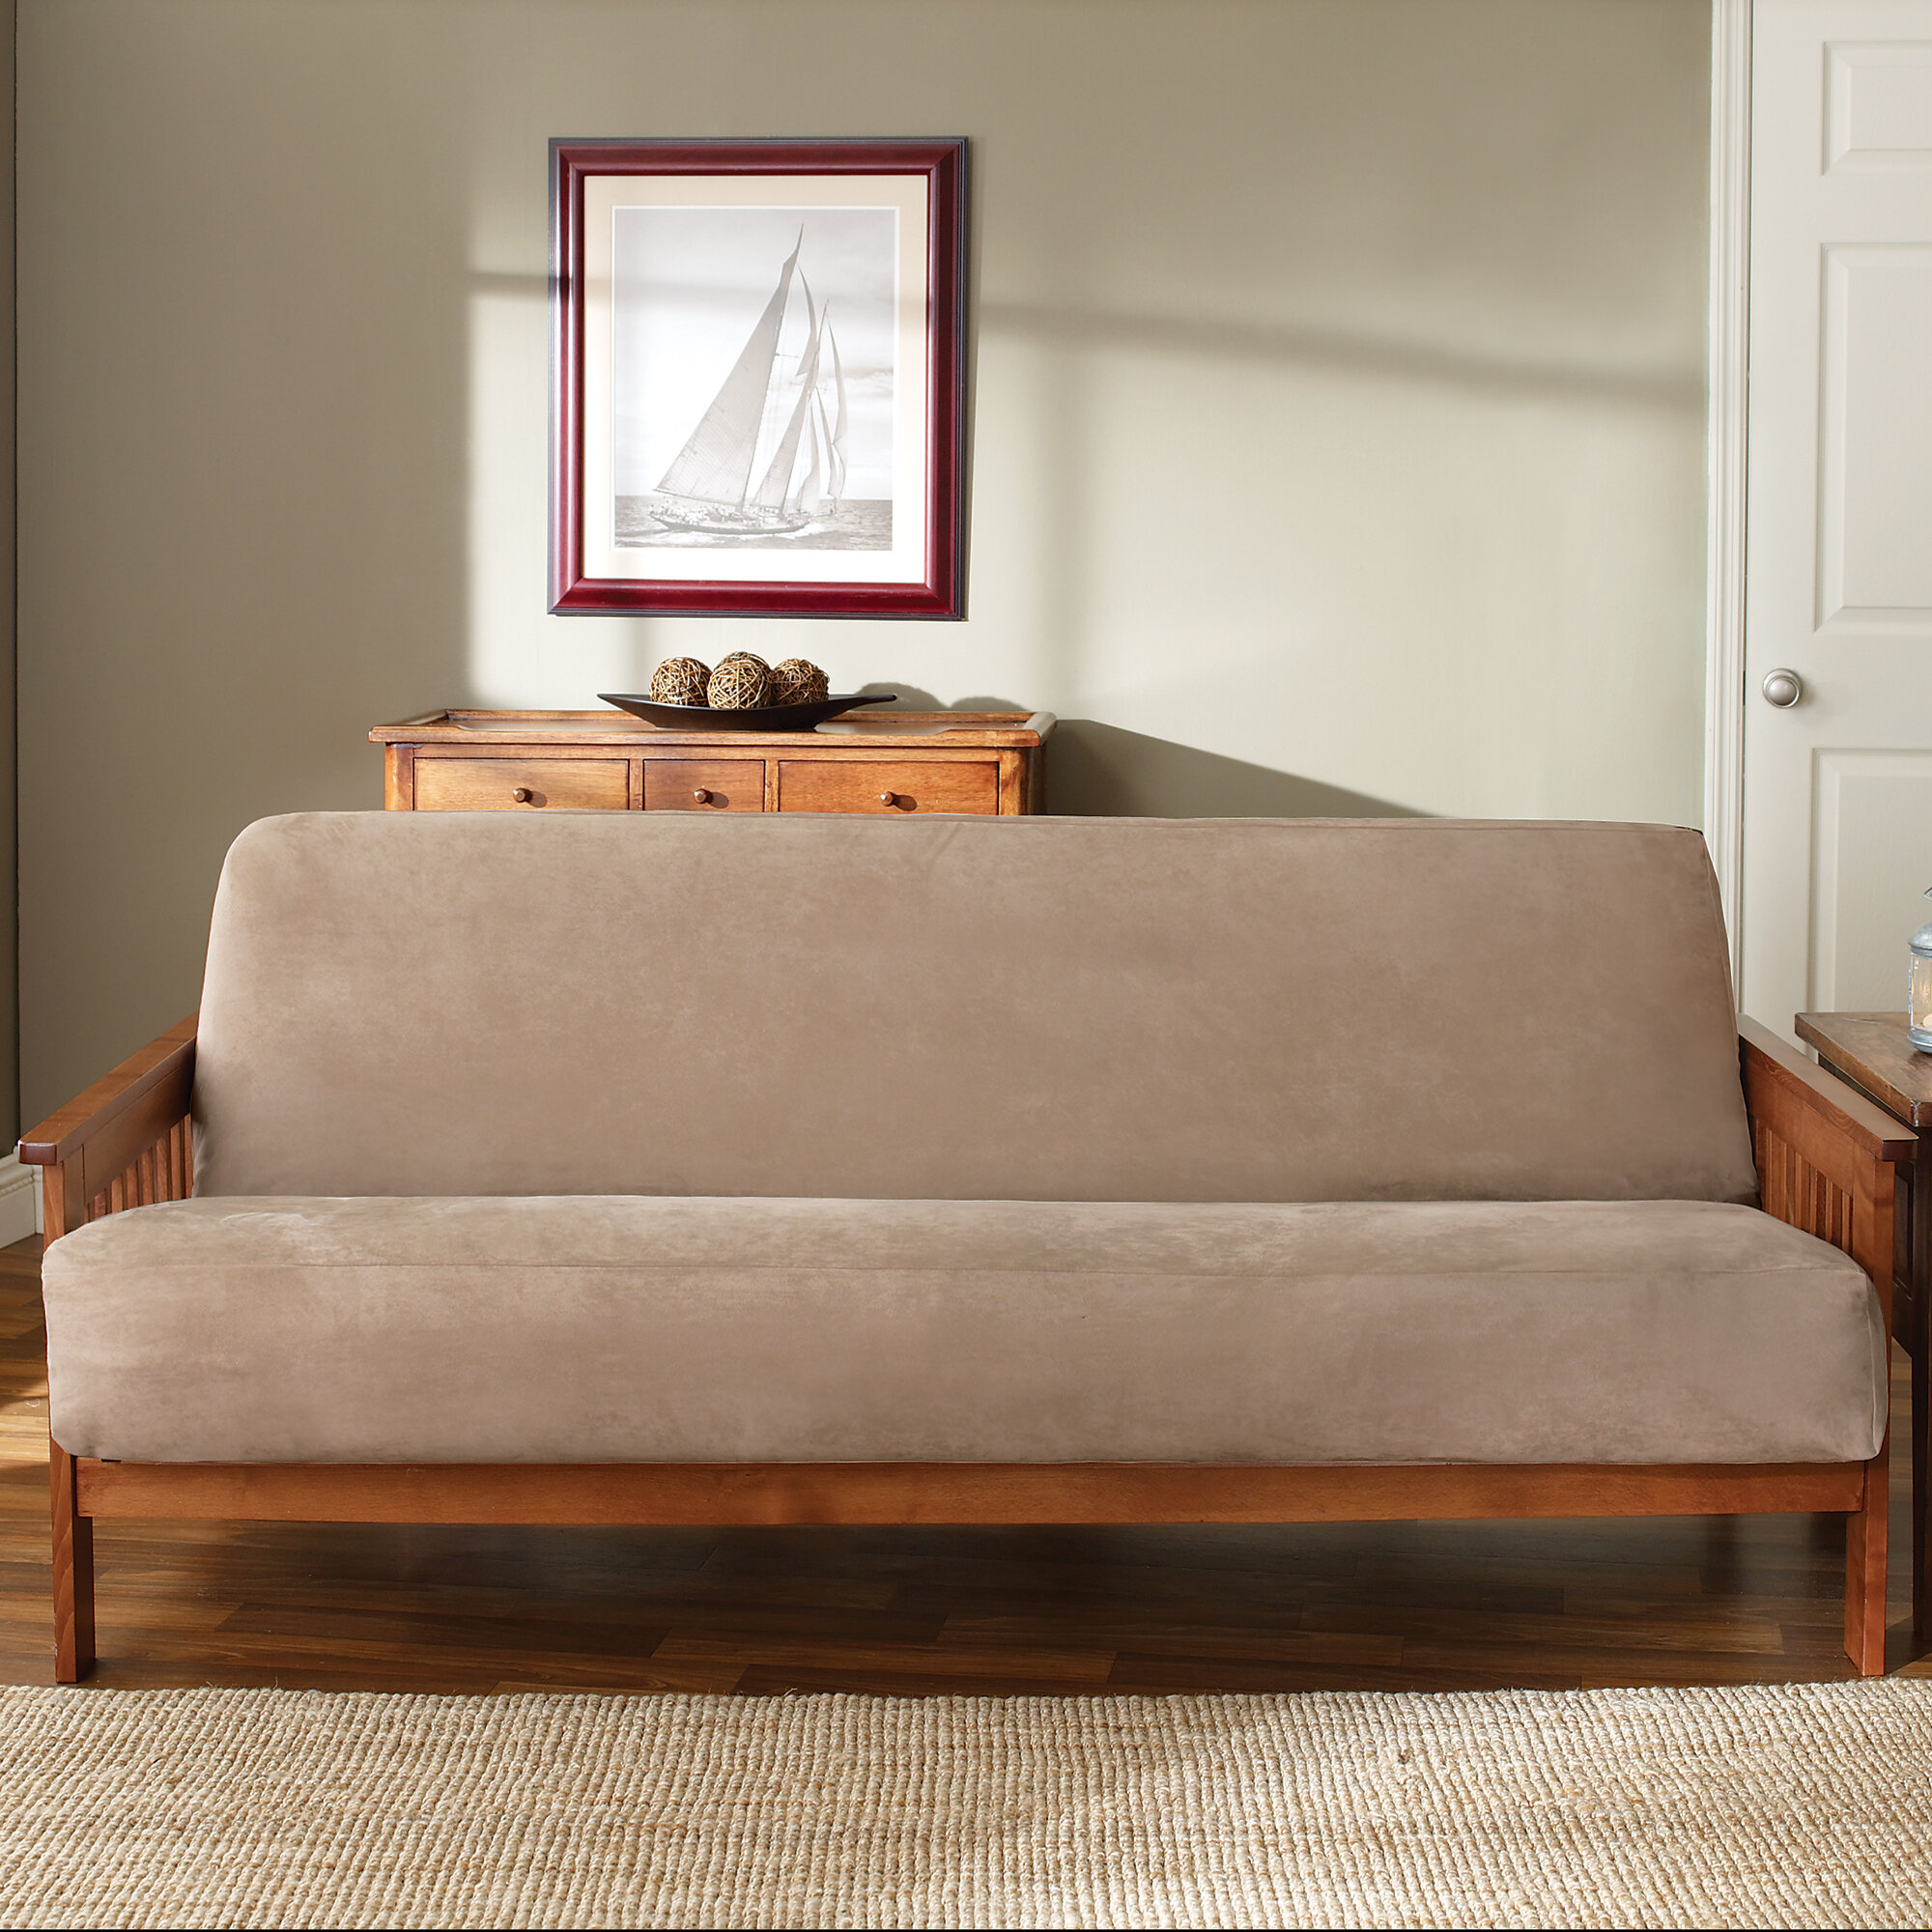 Suede-Beige OctoRose Full Size 3 Side Zipper Micro Suede Futon Slipcover Futon Cover 54x75+8 Cover only, Mattress do not included Inch